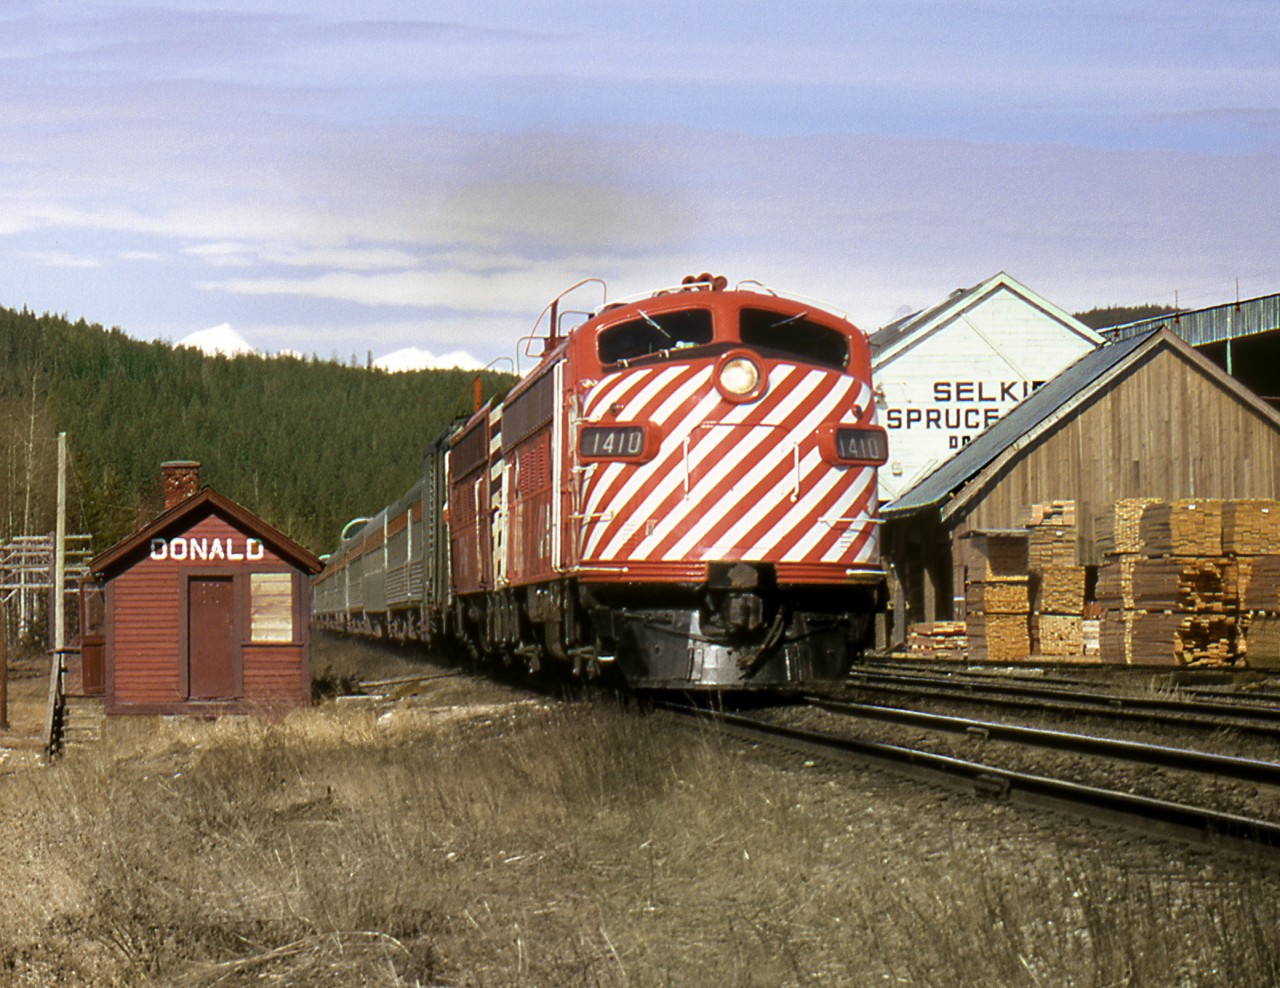 Eastbound "Canadian" passes the shelter station and the sawmill at Donald BC west of Golden BC. Passenger service has gone from this line and the sawmill closed years ago.